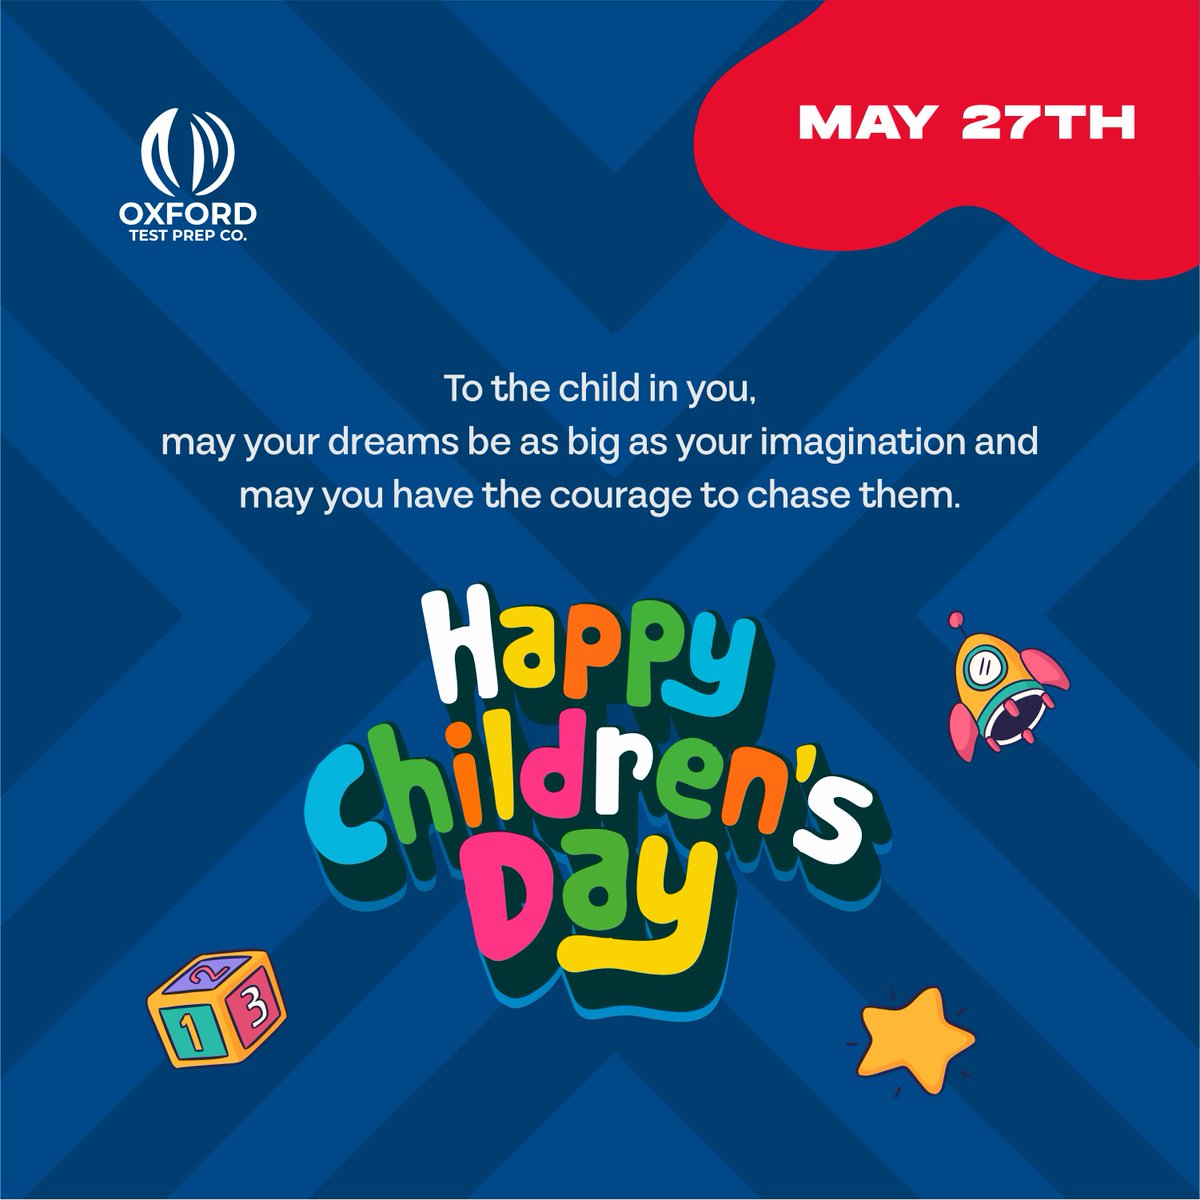 Happy Children's Day to You!!!!

Always keep the inner child in you alive

#OTPC #IELTS #SAt #ACT #TOEfl #internationalstudent #studyabroad #studyinCANADA2024 #studyinuk #studyinusa